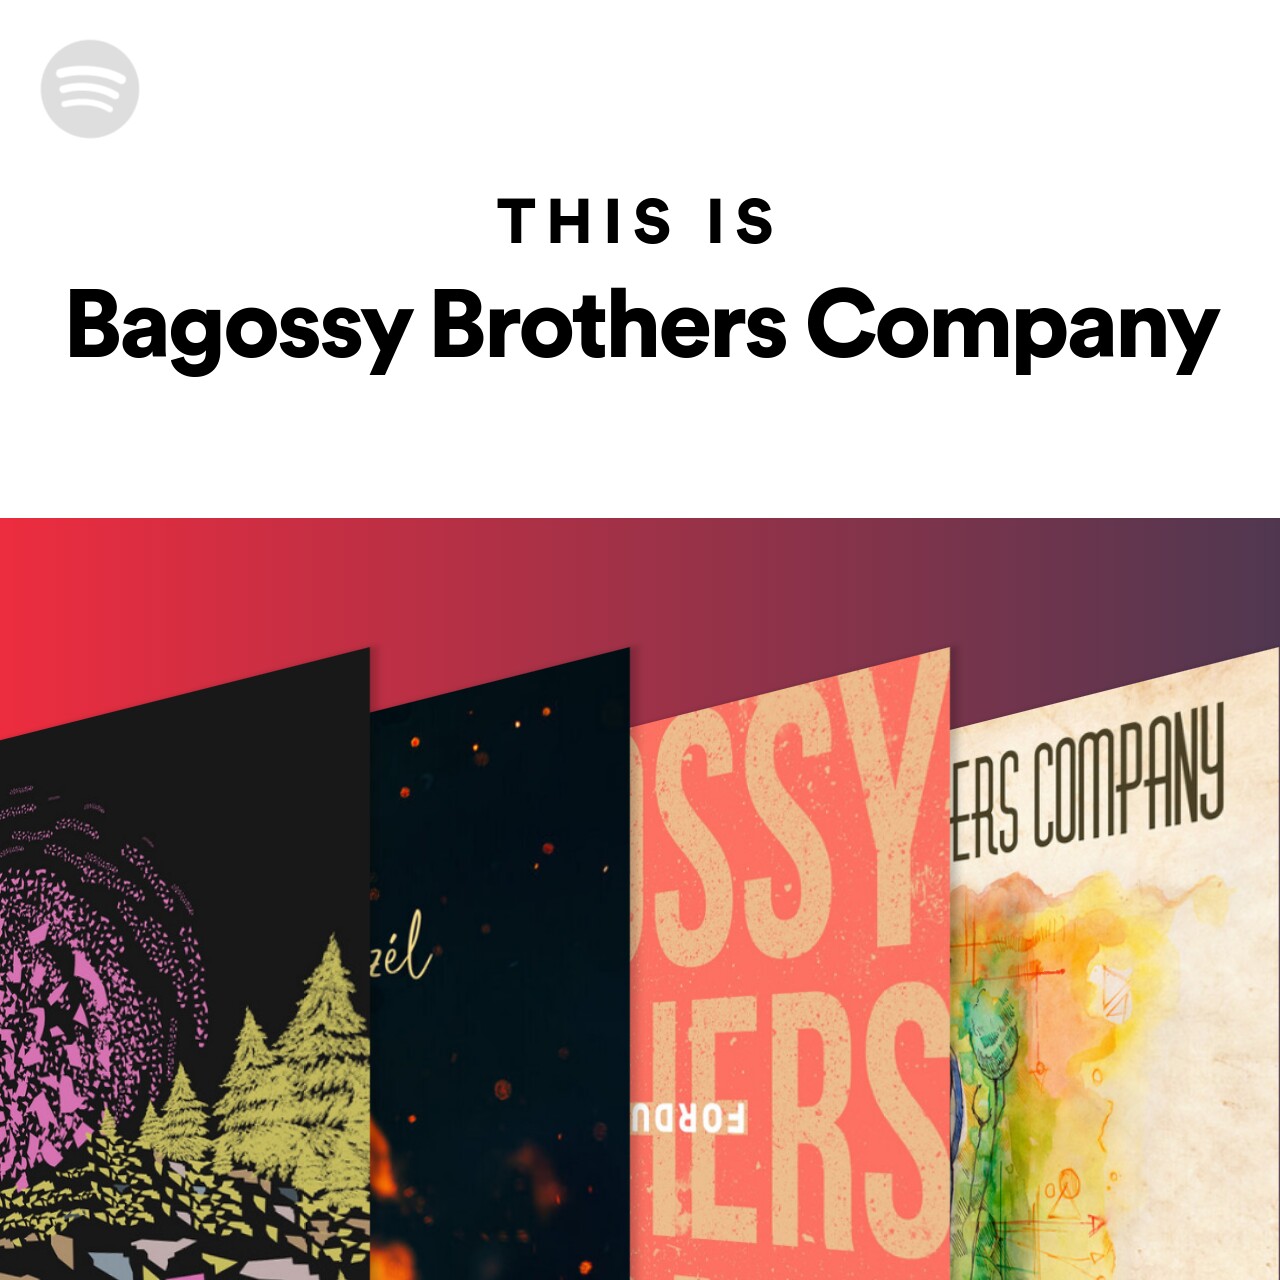 This Is Bagossy Brothers Company